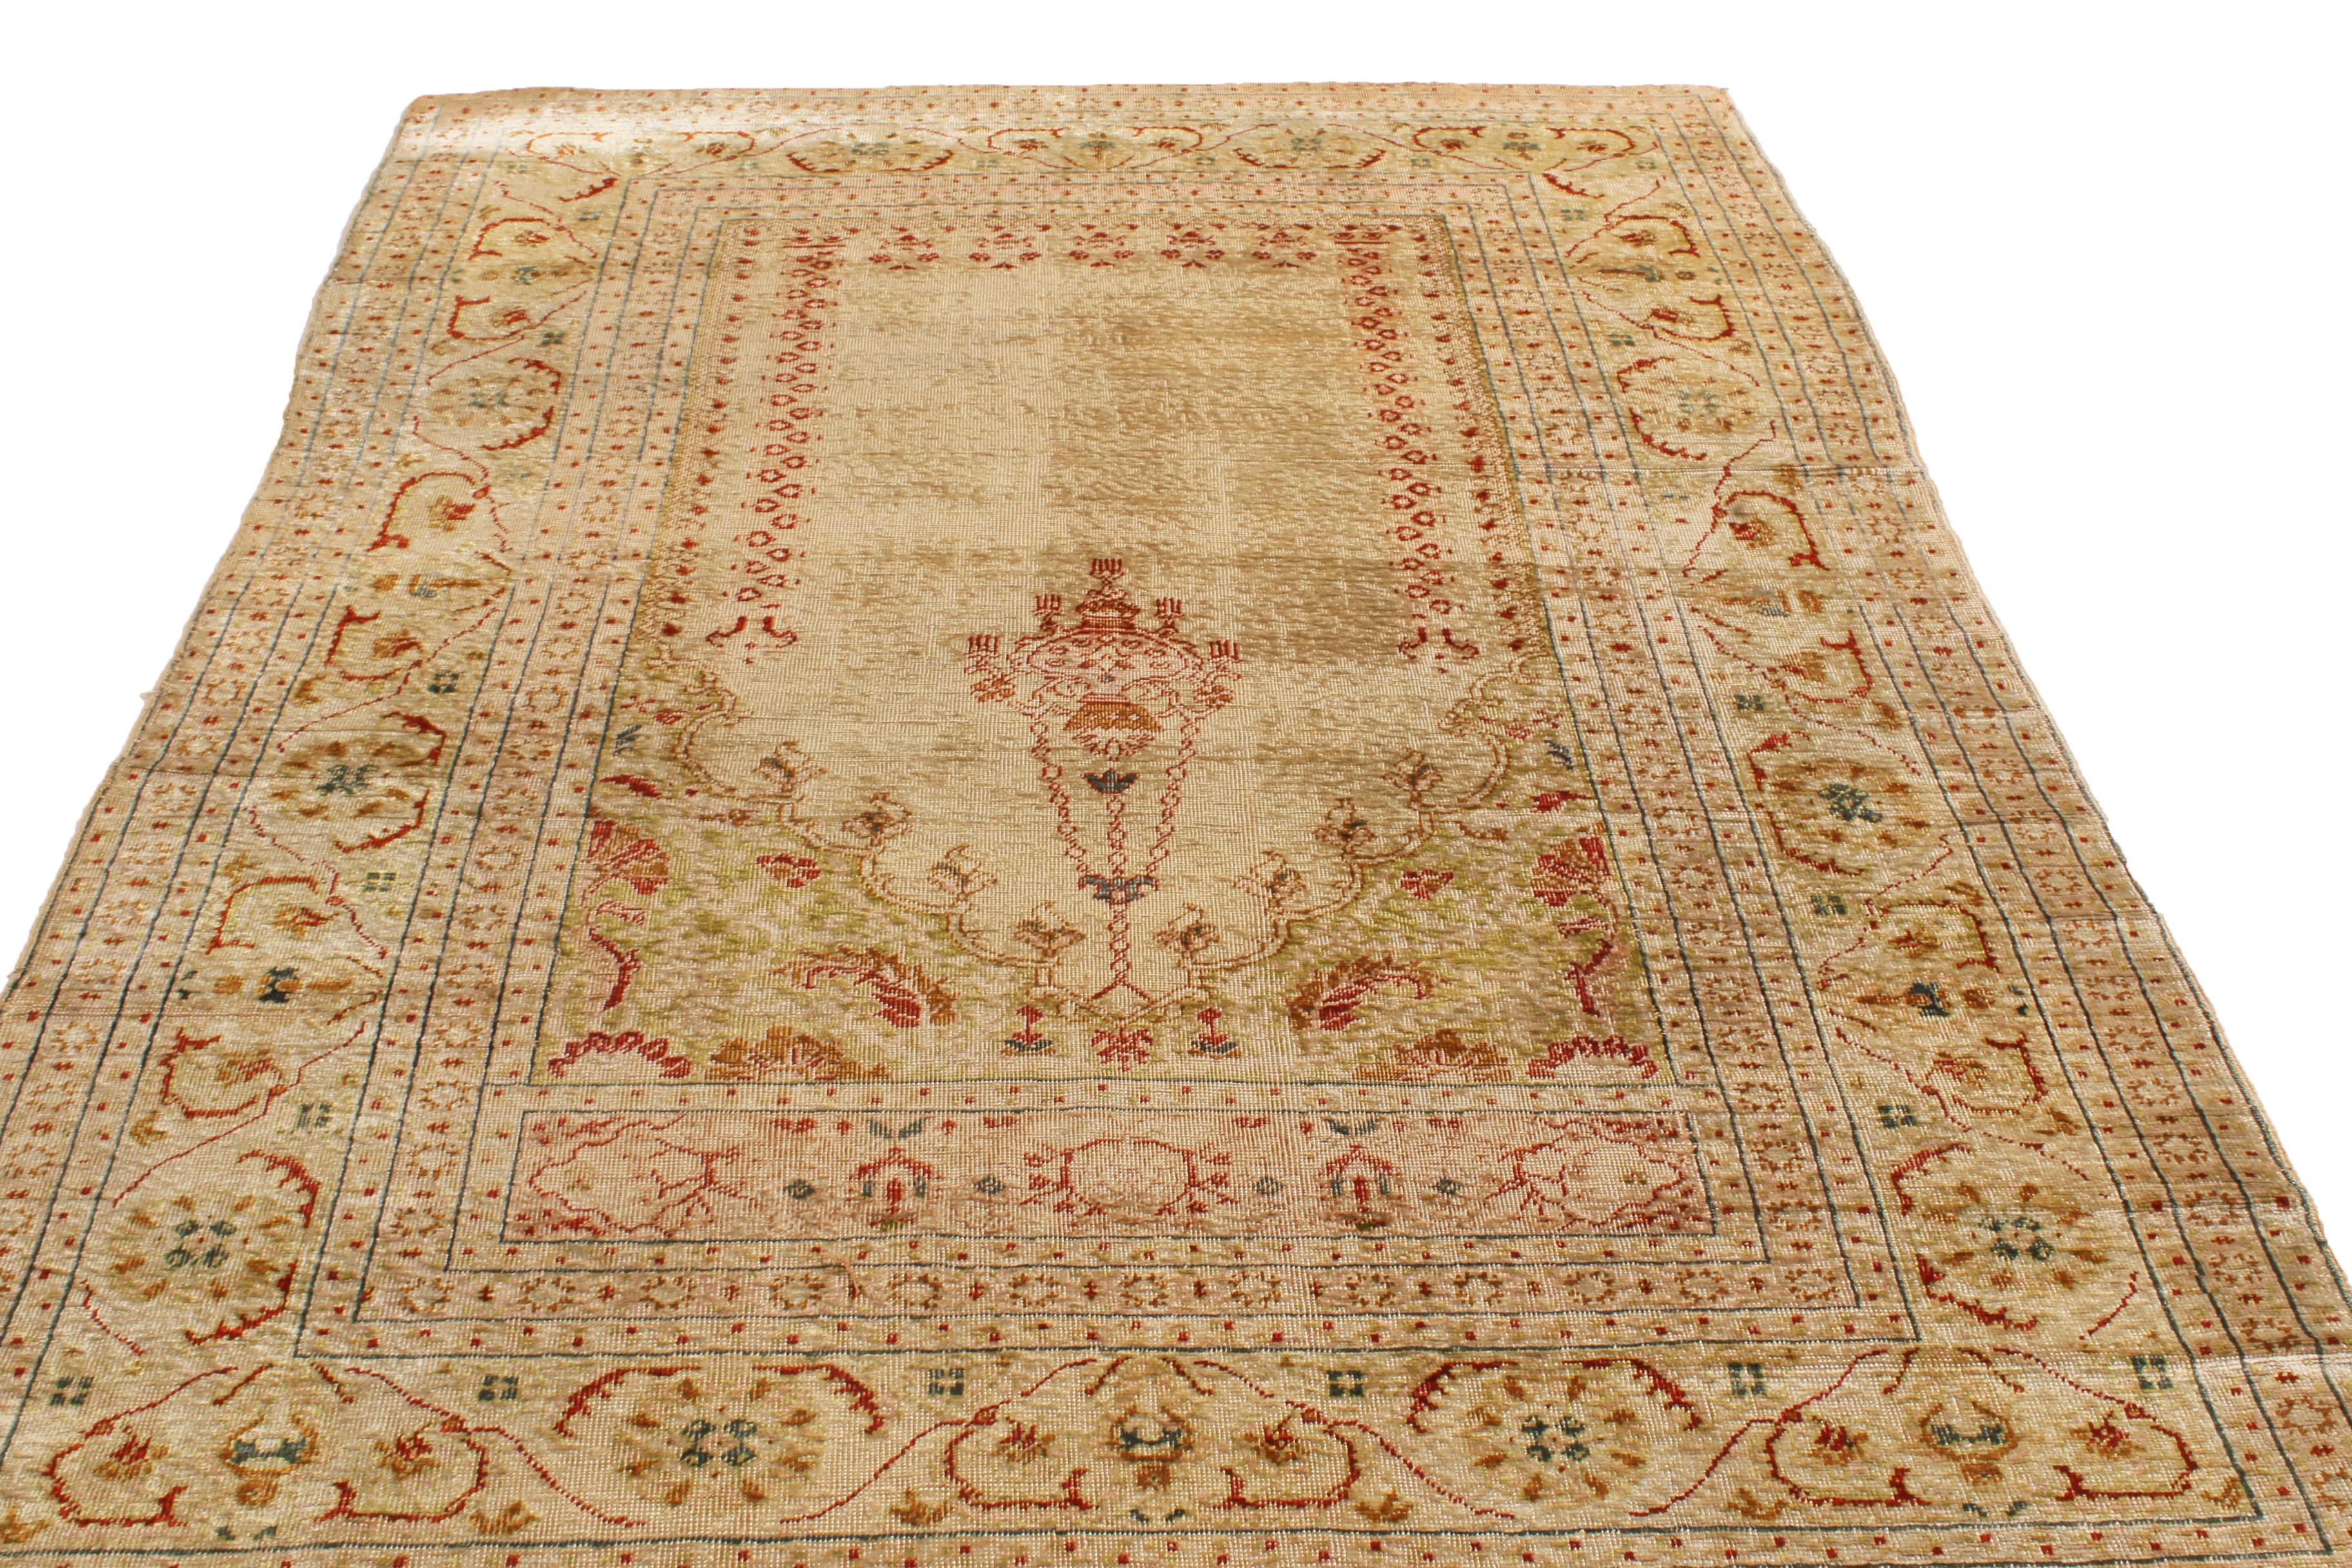 Hand-Knotted Antique Tabriz Beige and Red Persian Wool Rug